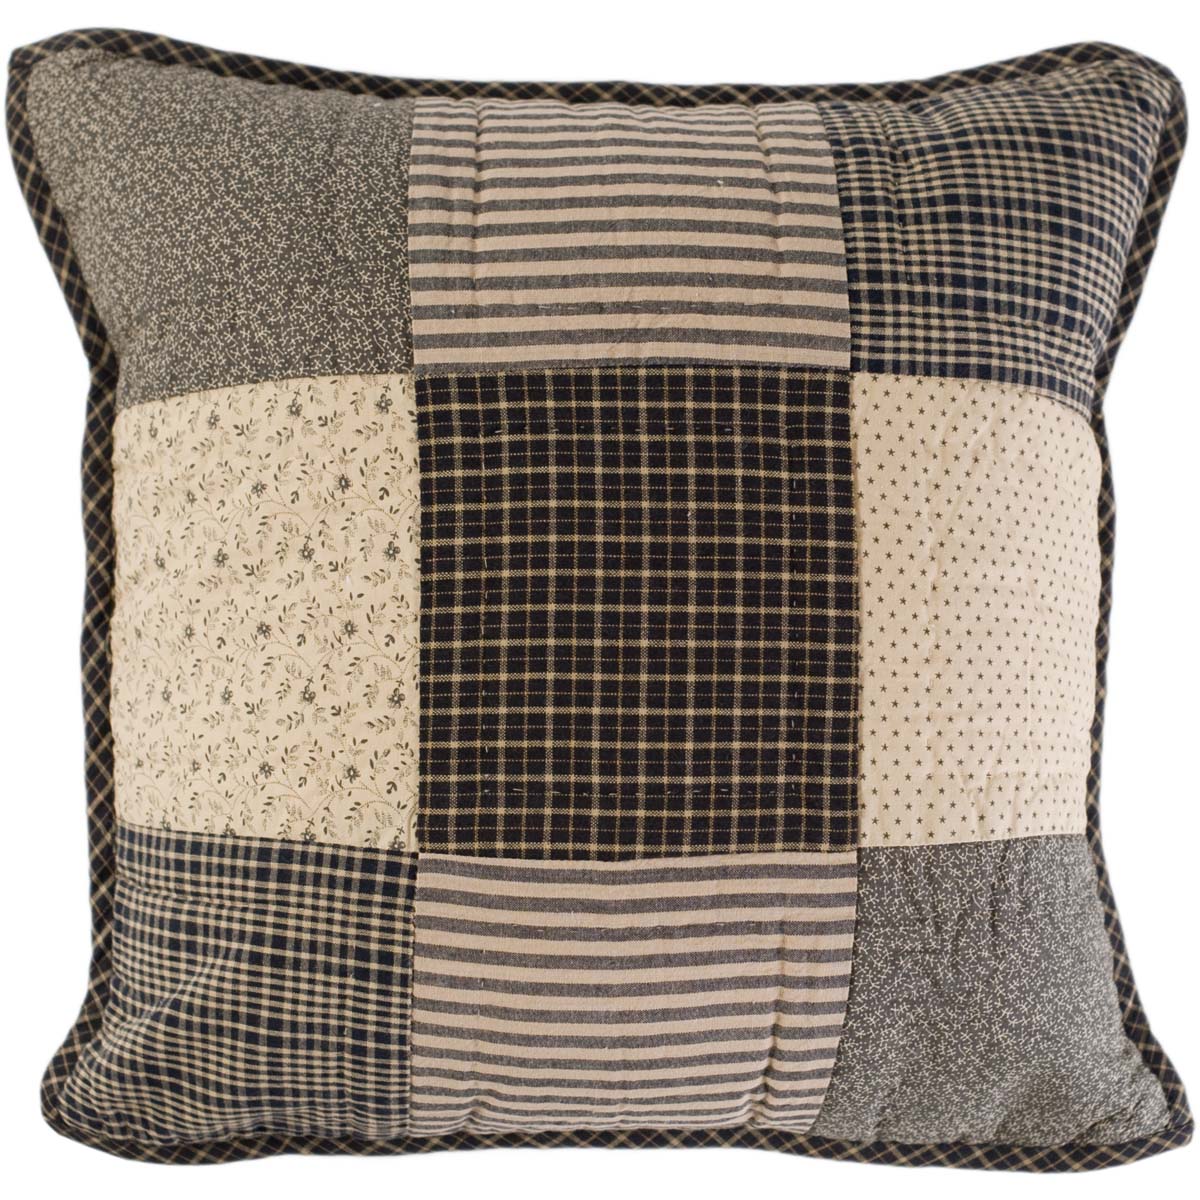 32685-Kettle-Grove-Quilted-Pillow-16x16-image-4